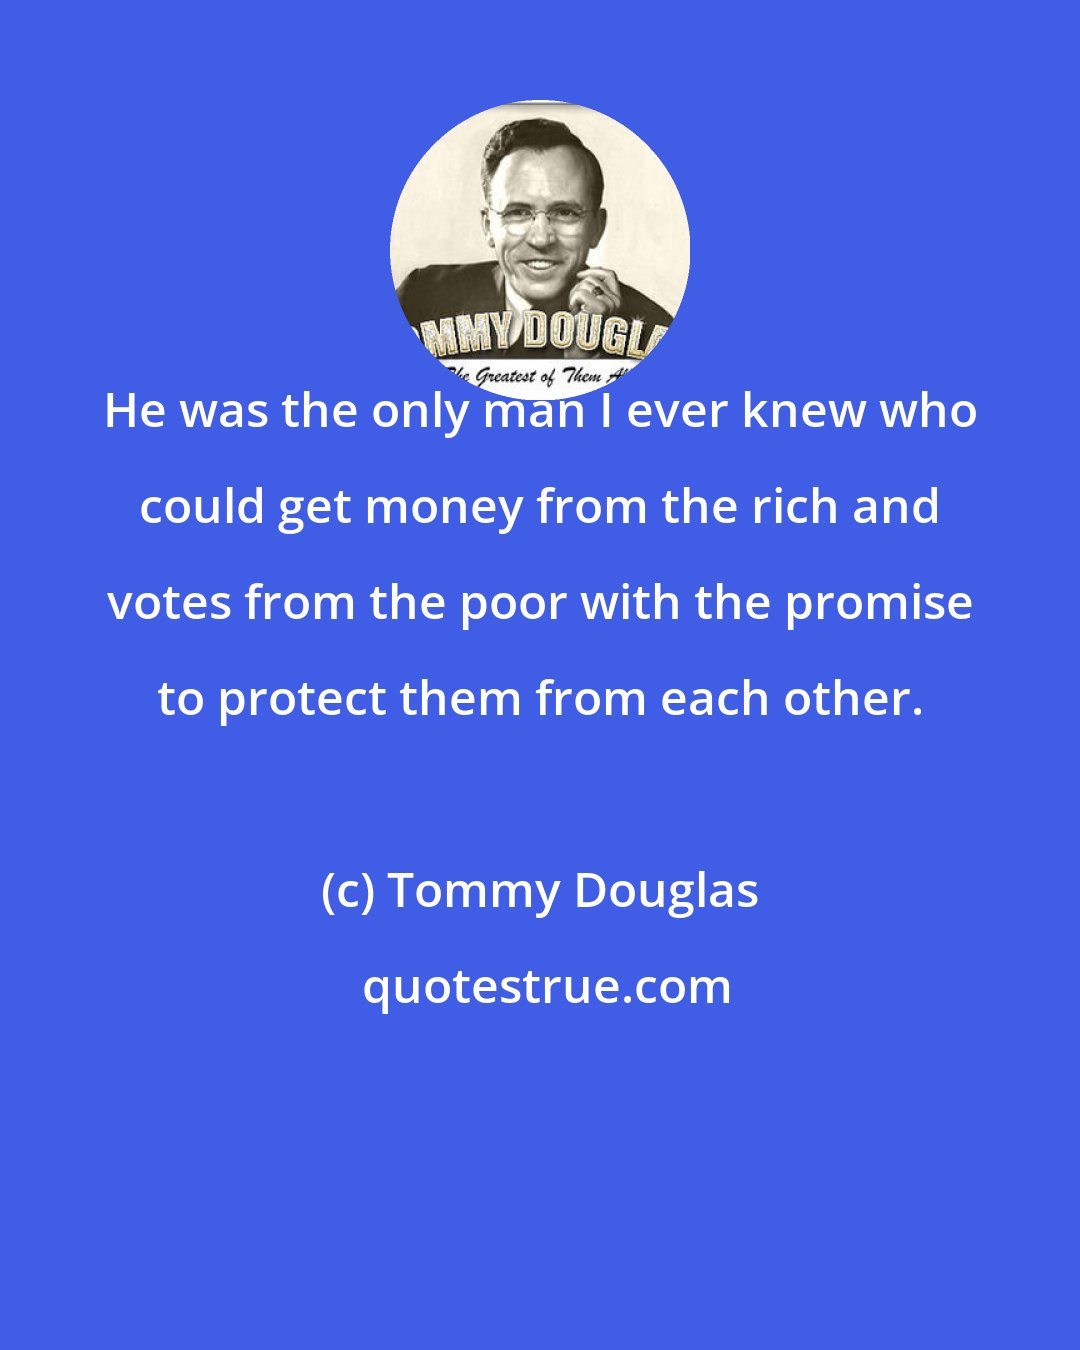 Tommy Douglas: He was the only man I ever knew who could get money from the rich and votes from the poor with the promise to protect them from each other.